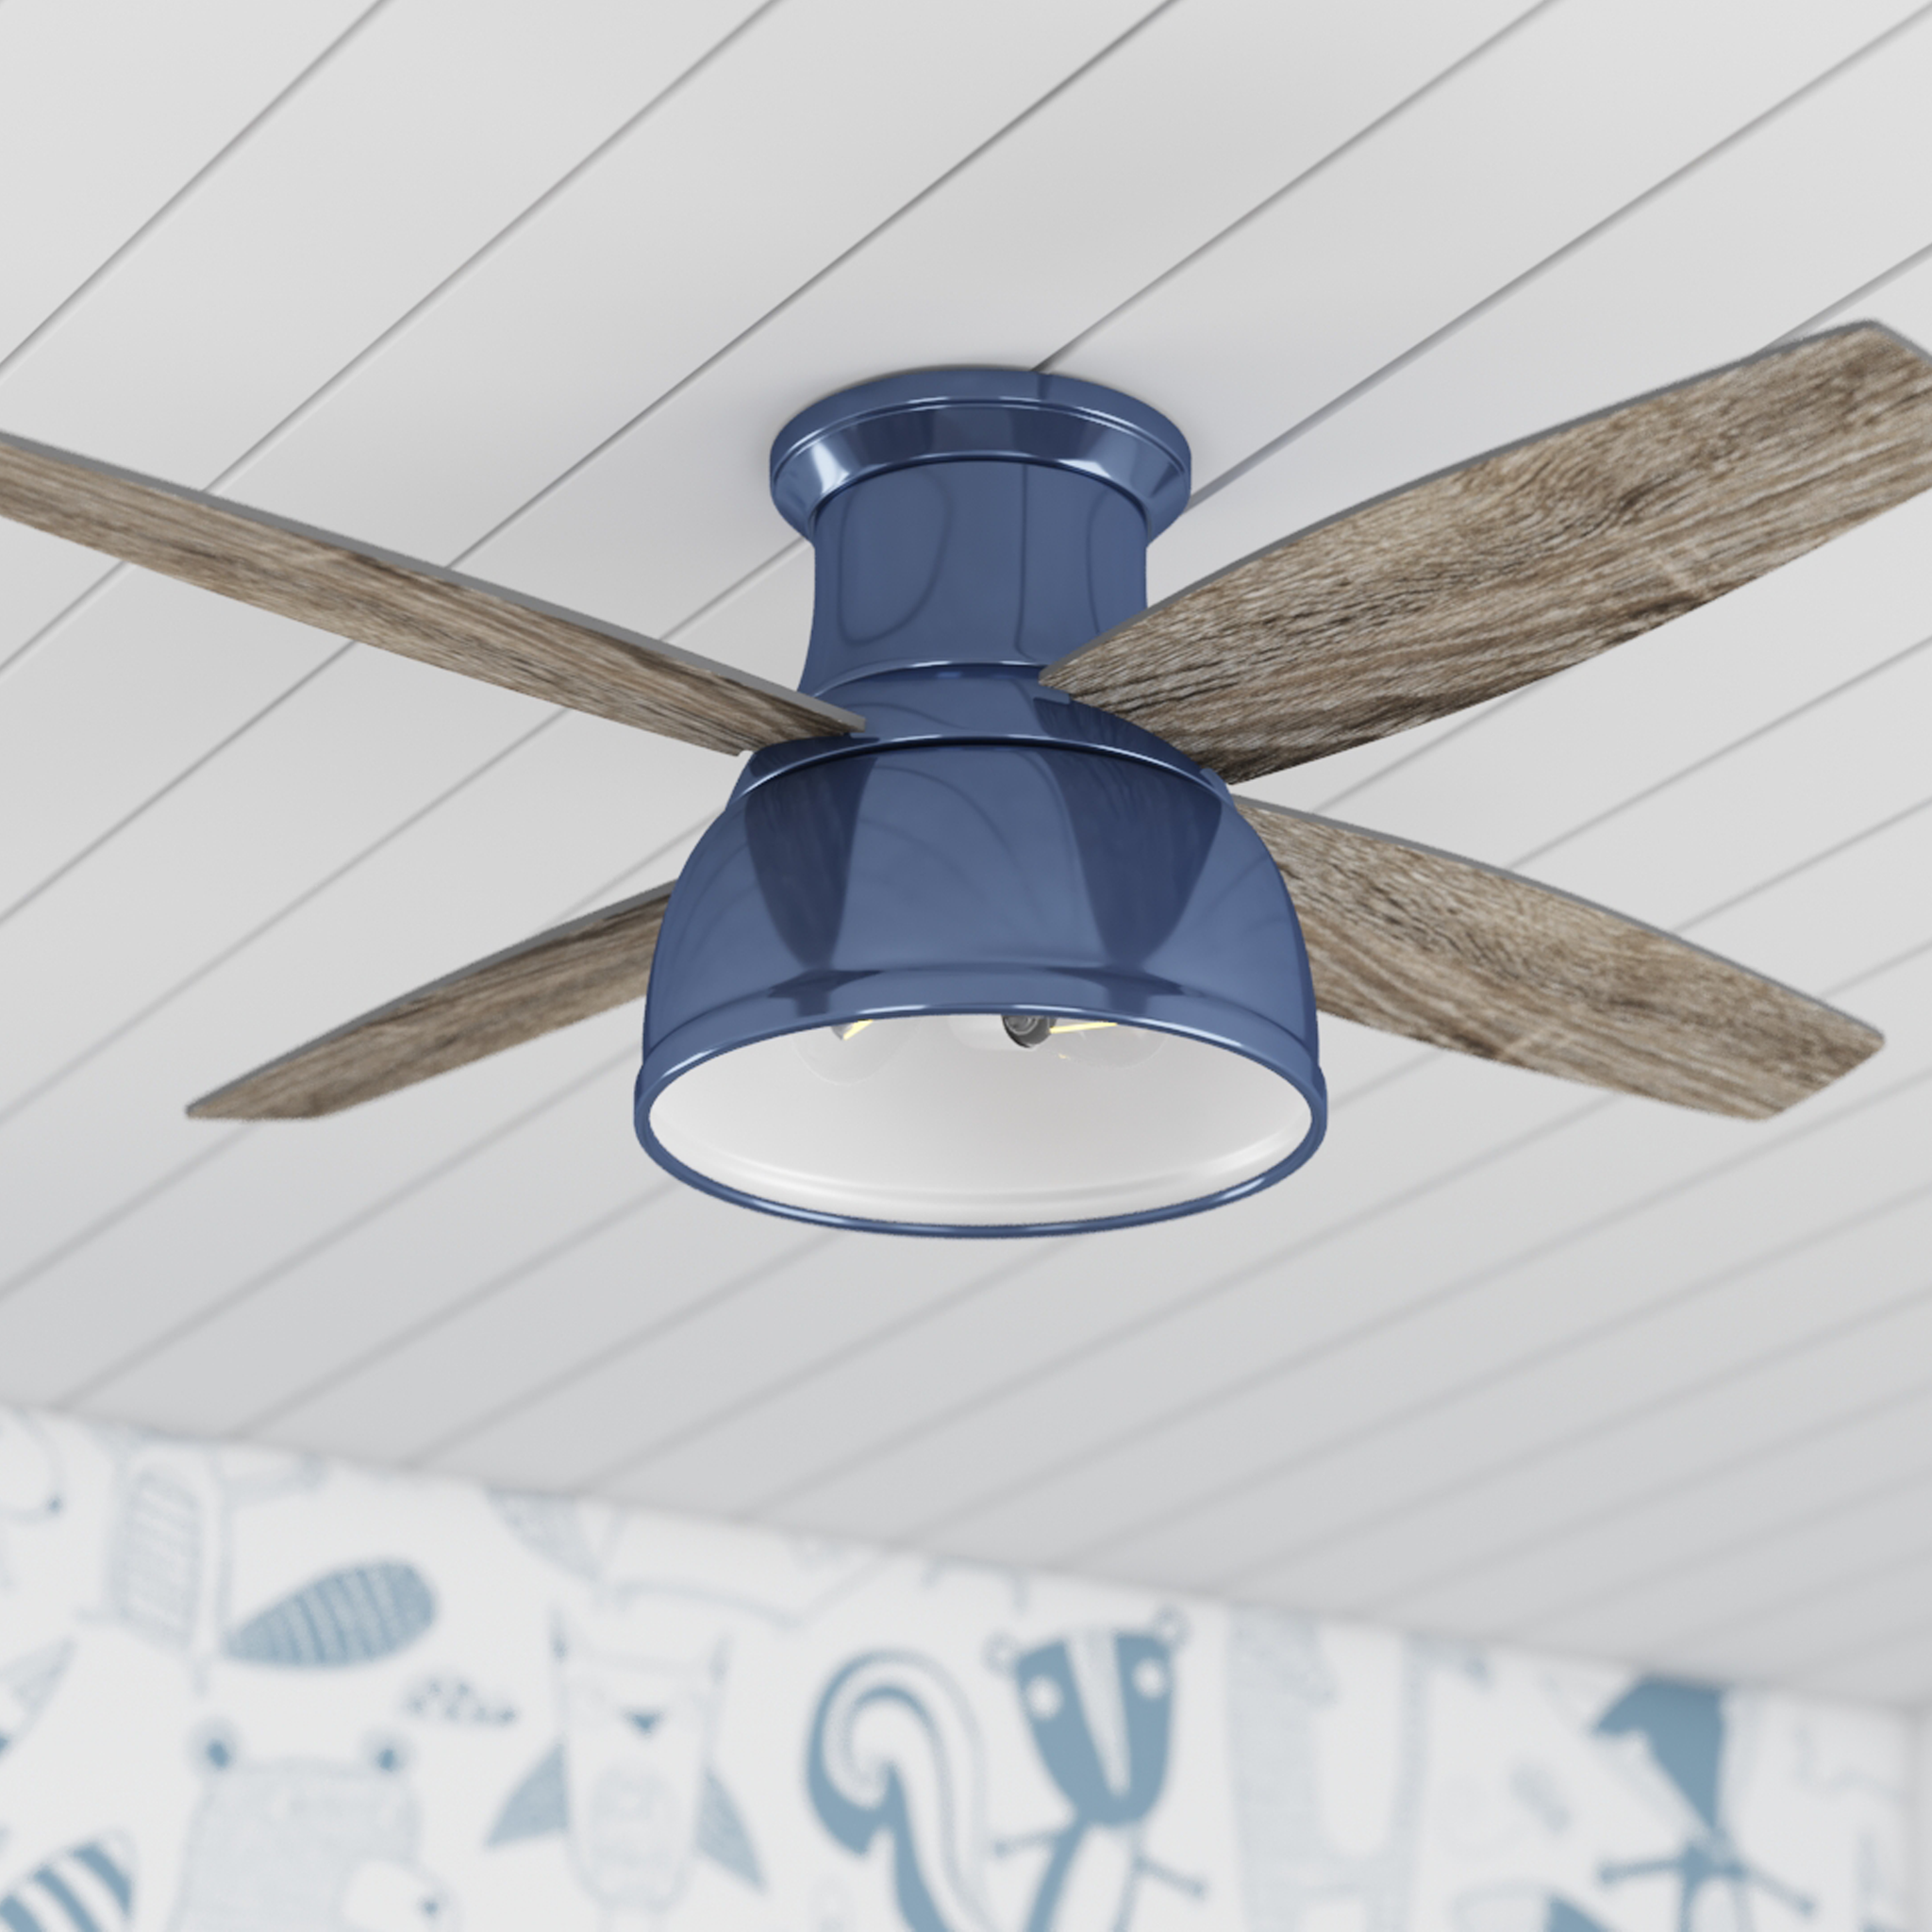 52 Inch Edora, Sapphire Blue, Remote Control, Ceiling Fan by Prominence Home